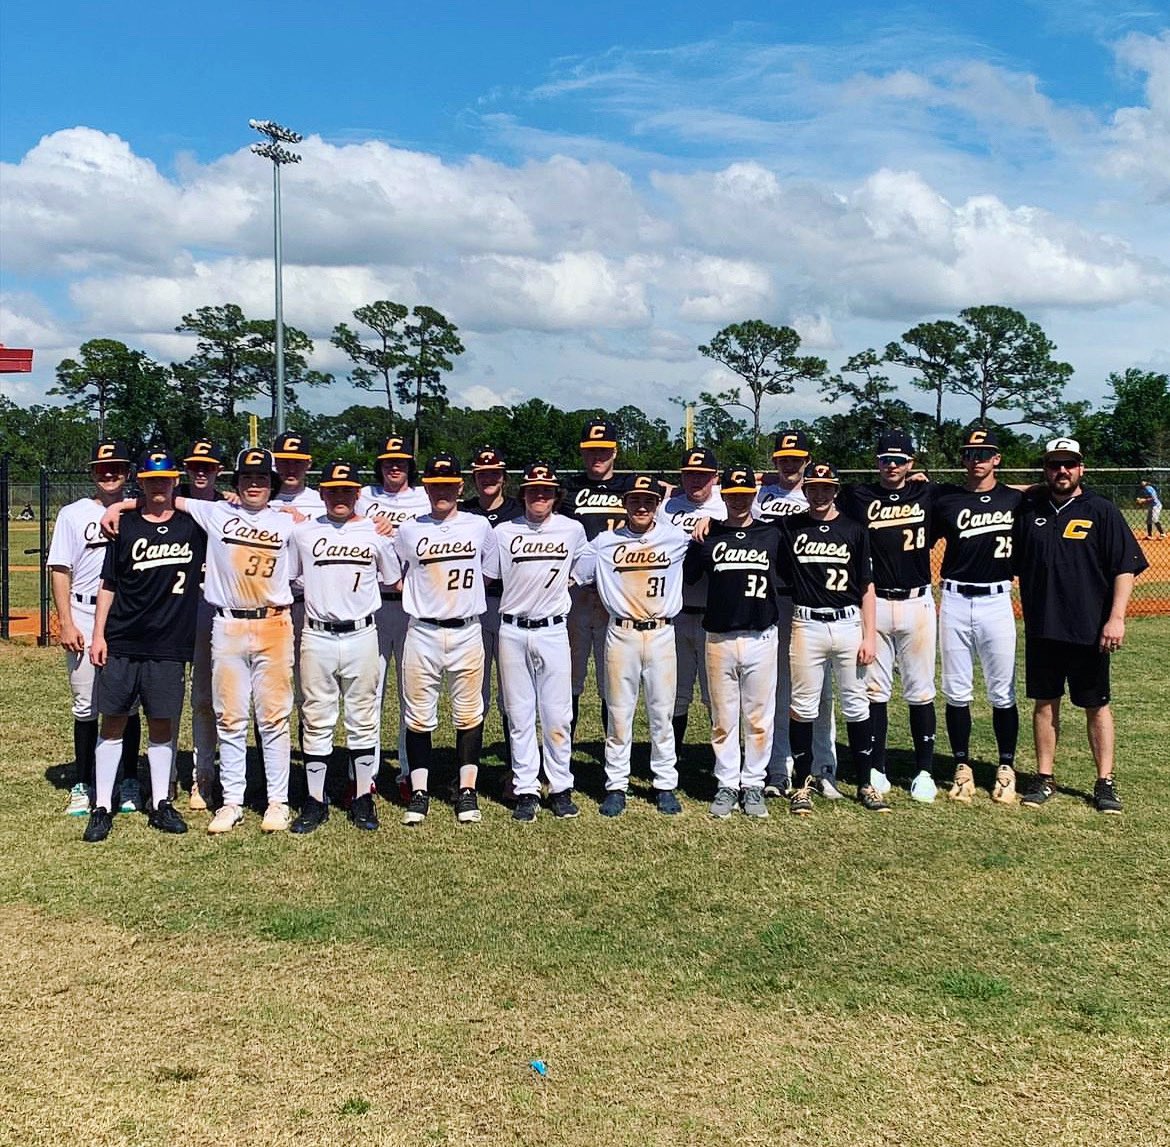 It was a fun week being part of two @thecanescanada teams at #pbrspringtraining23🇨🇦🌴. Learned a lot from these guys. 

#CanesCanada #CanesNewfoundland #CanesBaseball #CanesFamily